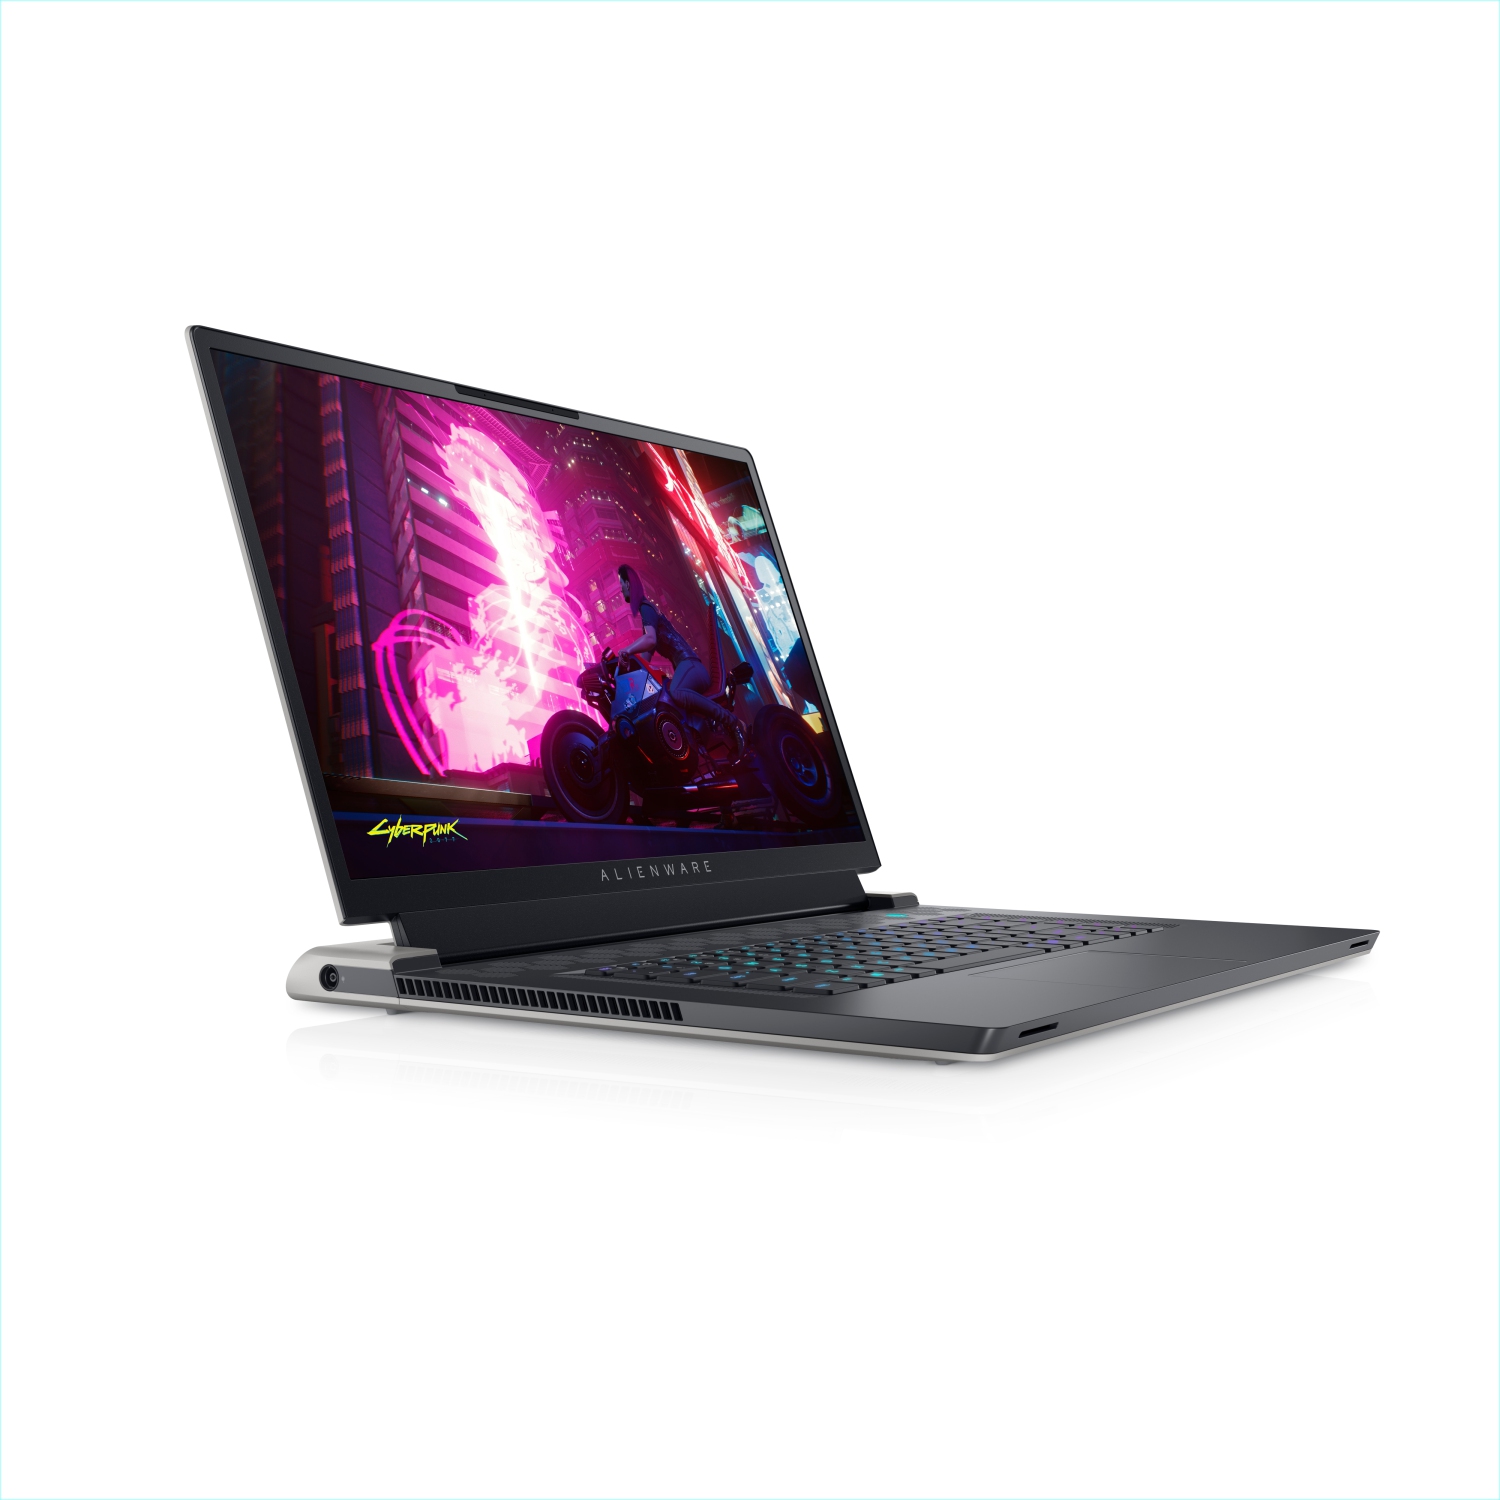 Refurbished (Excellent) – Dell Alienware X17 R1 Gaming Laptop (2021) | 17.3" FHD | Core i7 - 1TB SSD - 64GB RAM - RTX 3060 | 8 Cores @ 4.6 GHz - 11th Gen CPU - 6GB GDDR6